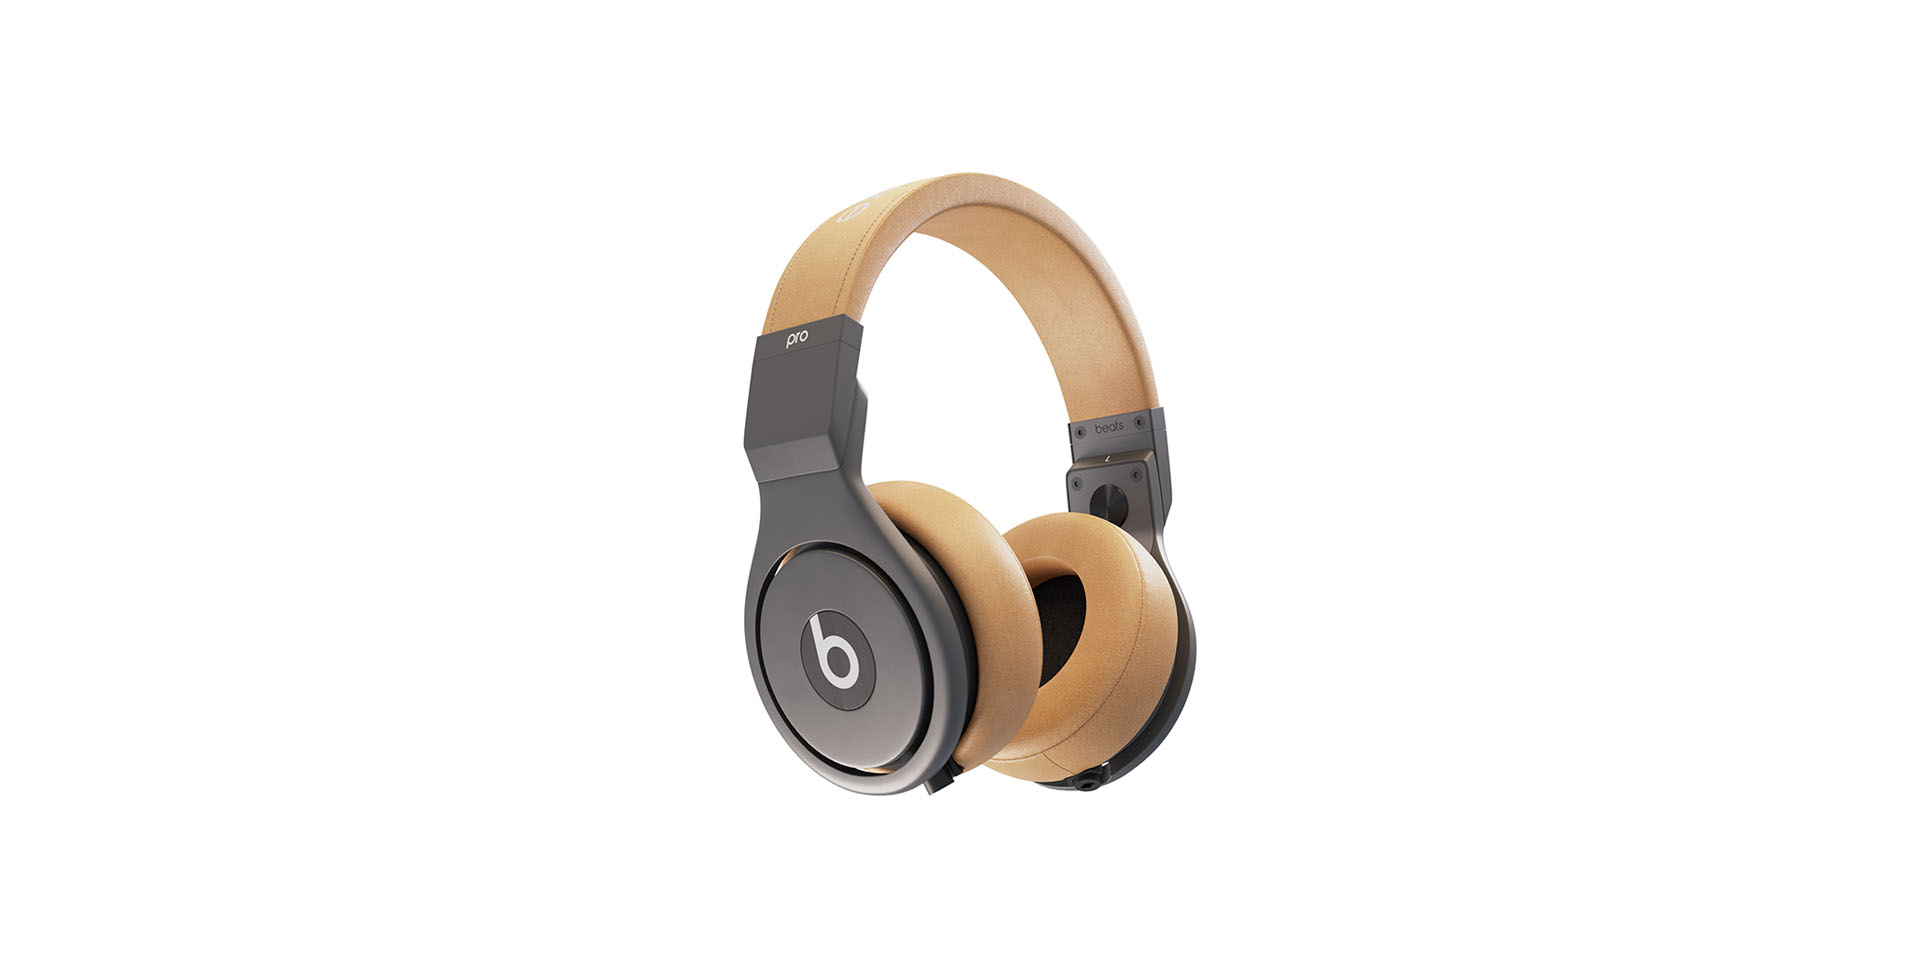 Computer-generated, photo-realistic 3D rendering of a pair of Beats headphones